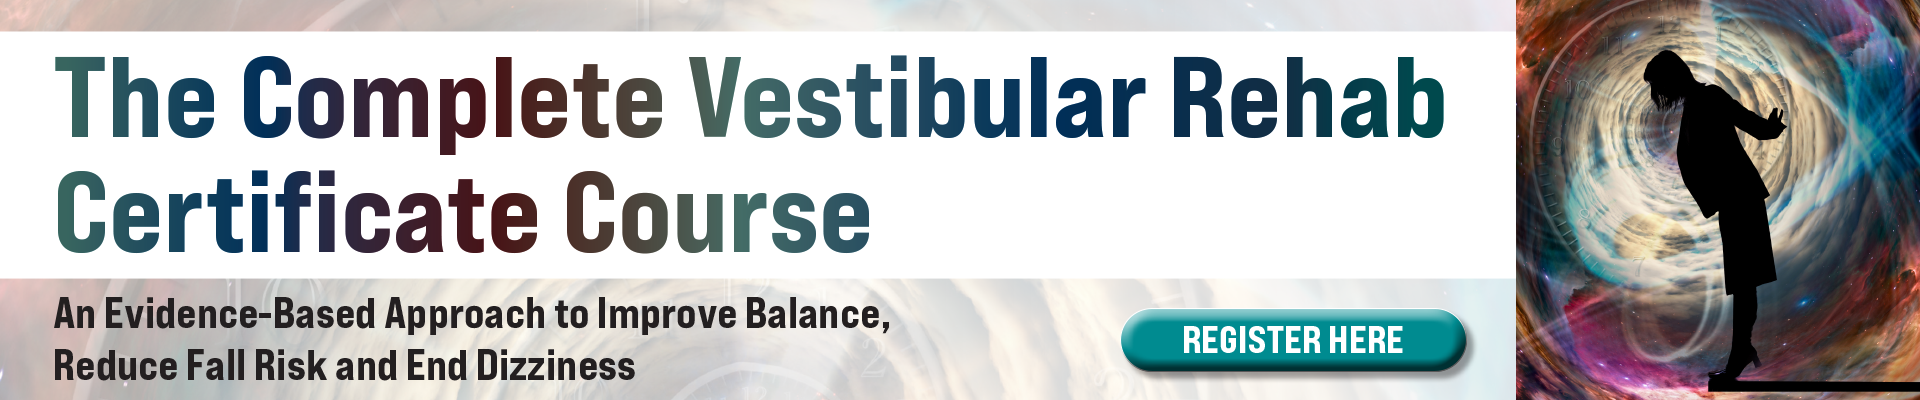 The Complete Vestibular Rehab Certificate Course: An Evidence-Based Approach to Improve Balance, Reduce Fall Risk and End Dizziness